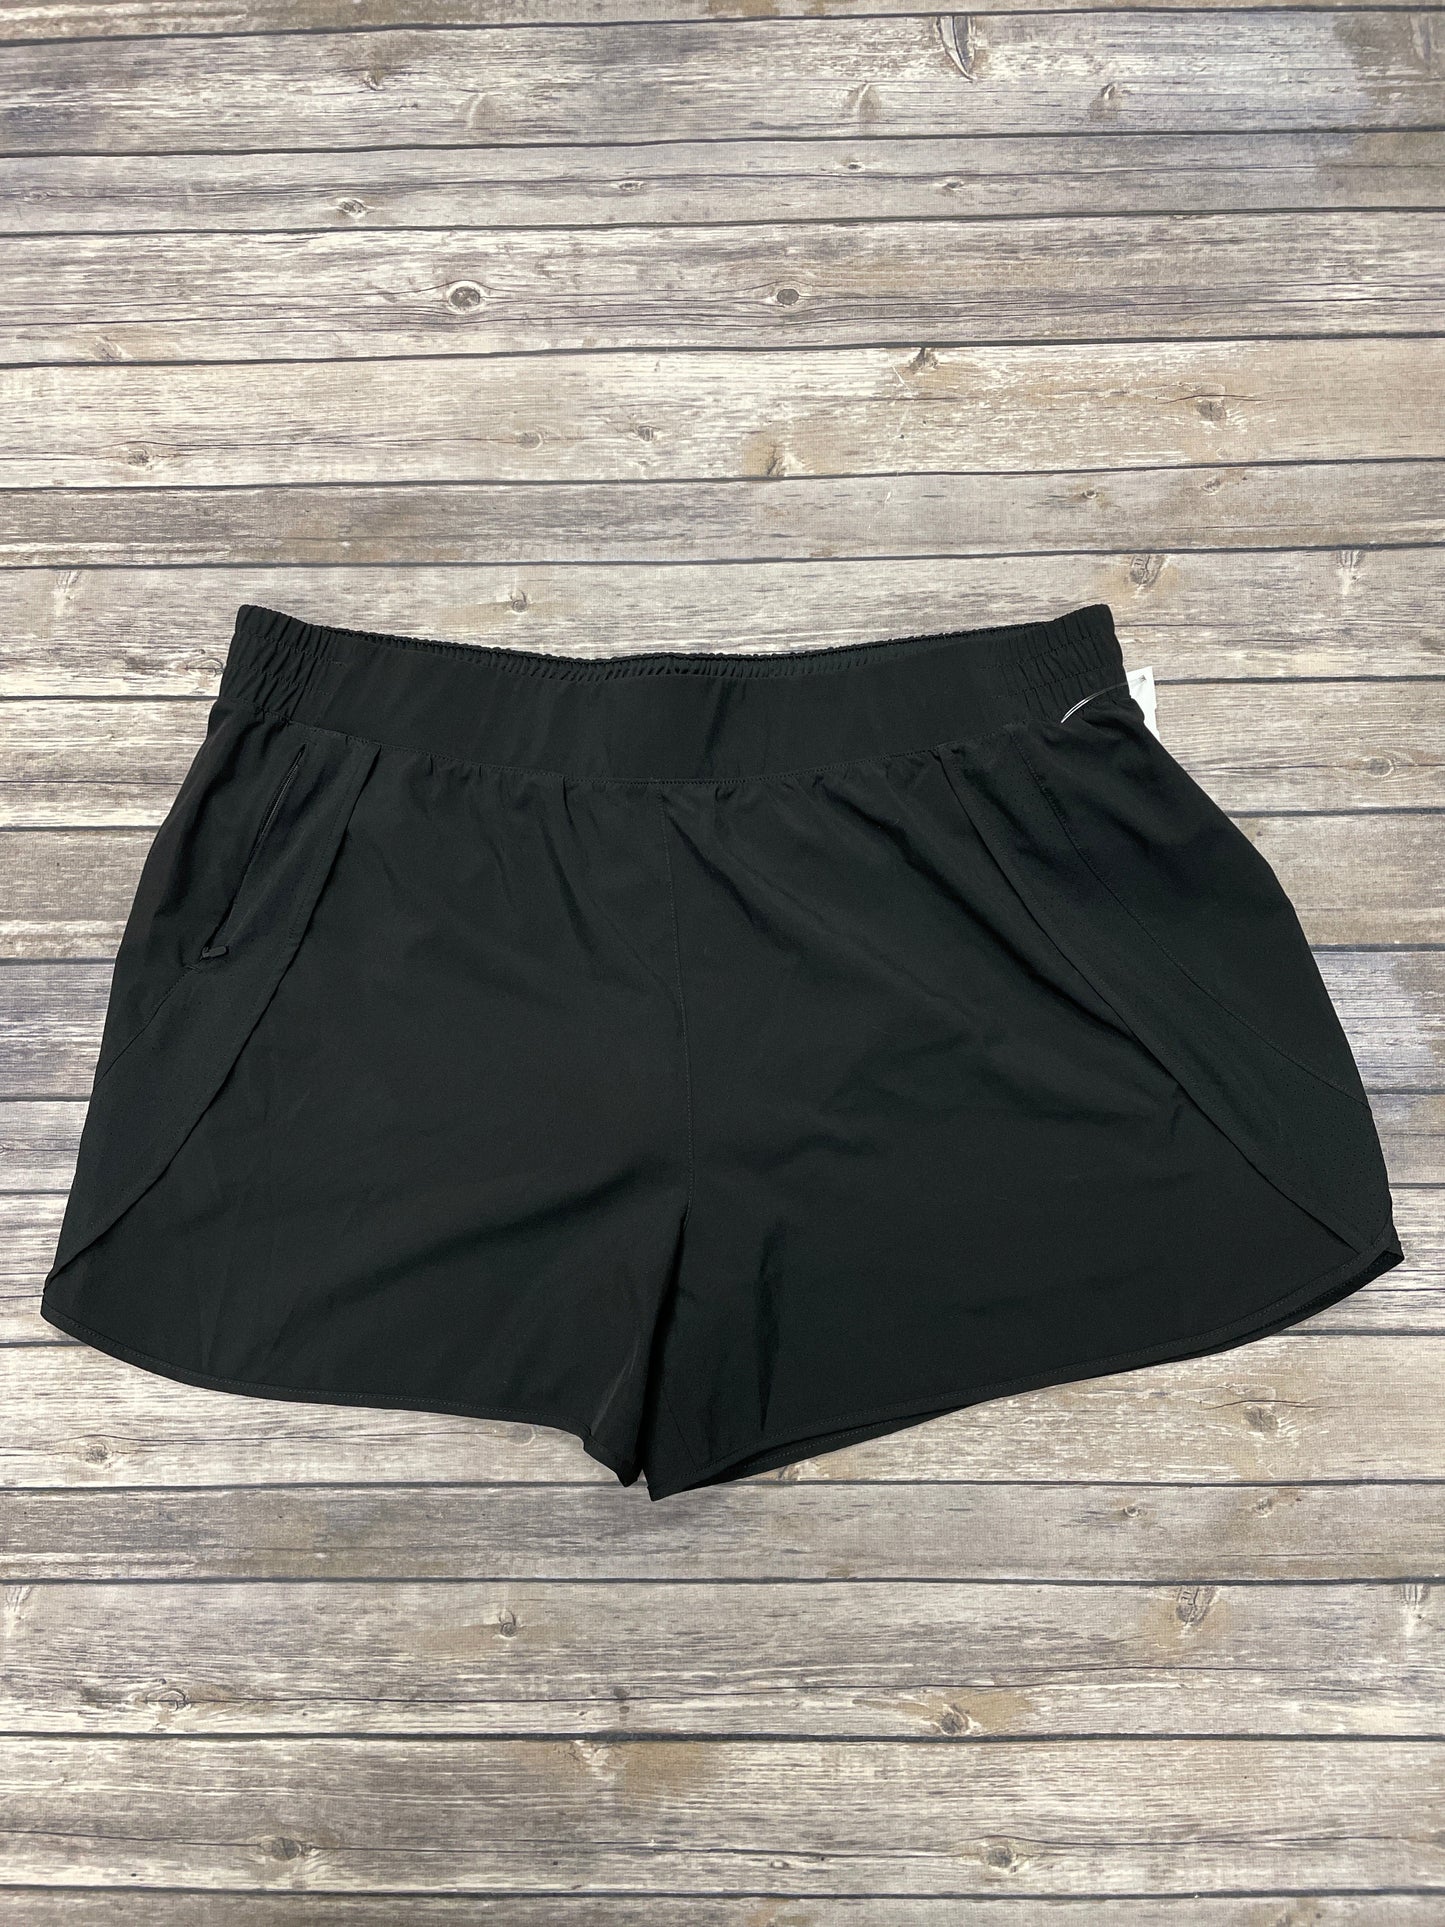 Athletic Shorts By Avia  Size: 3x